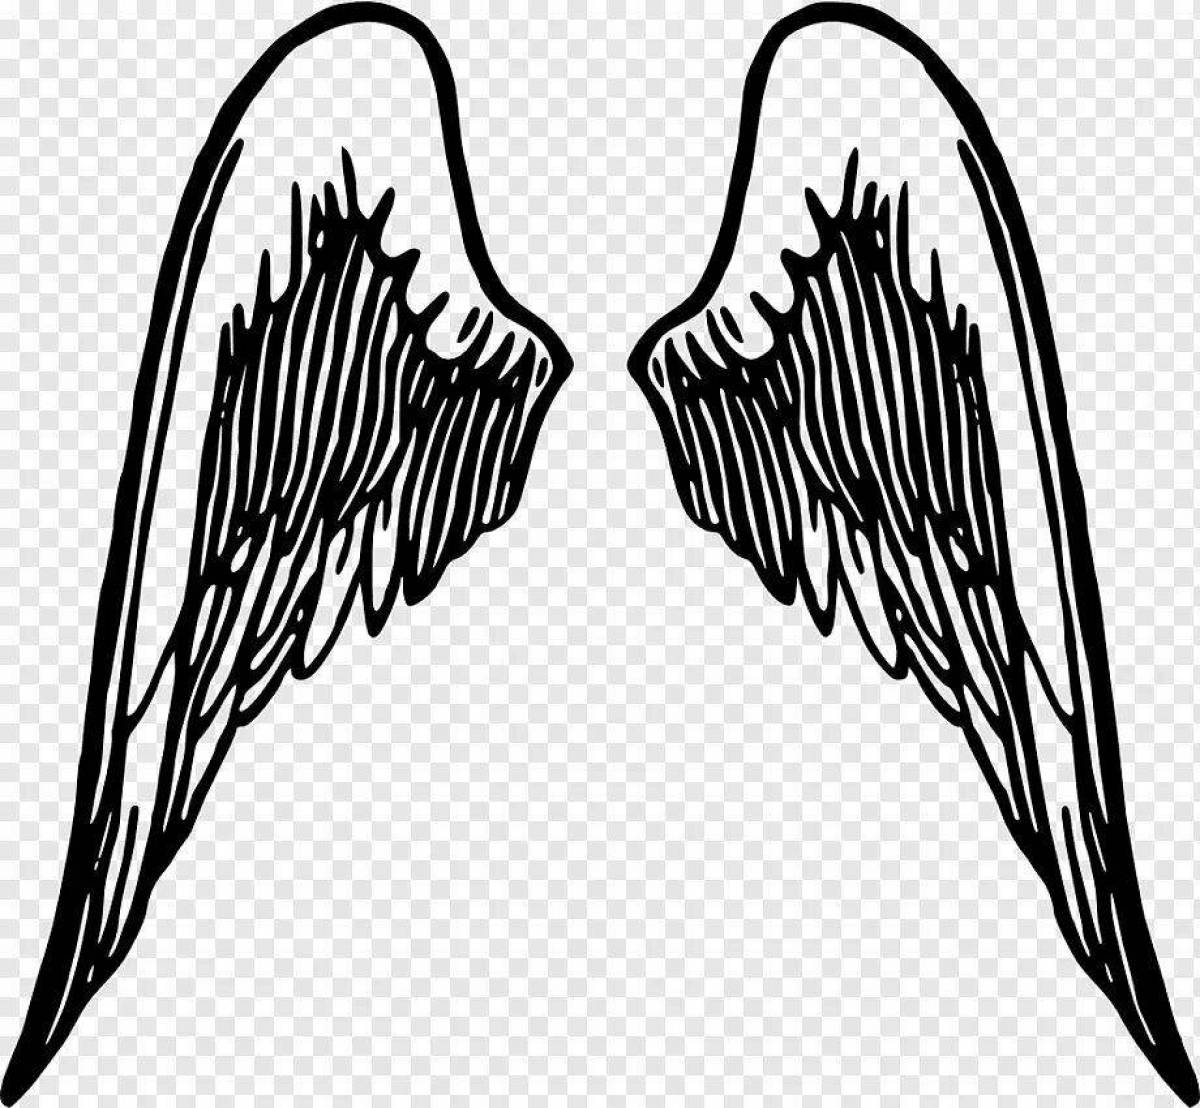 Exquisite angel wings coloring book